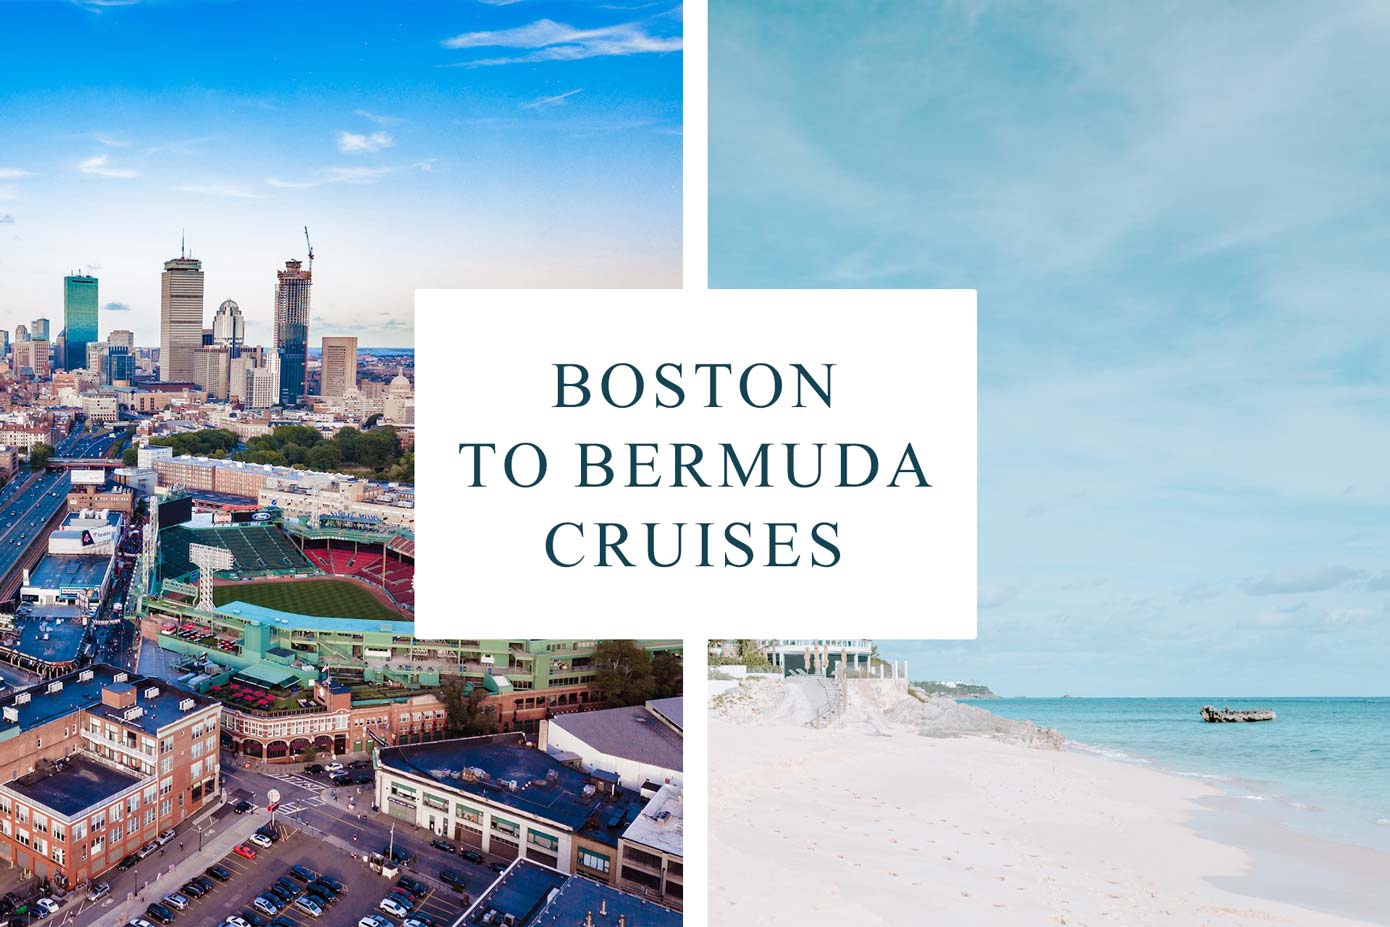 Bermuda Cruises from Boston (7 Day Cruises) Cruise Travel Outlet